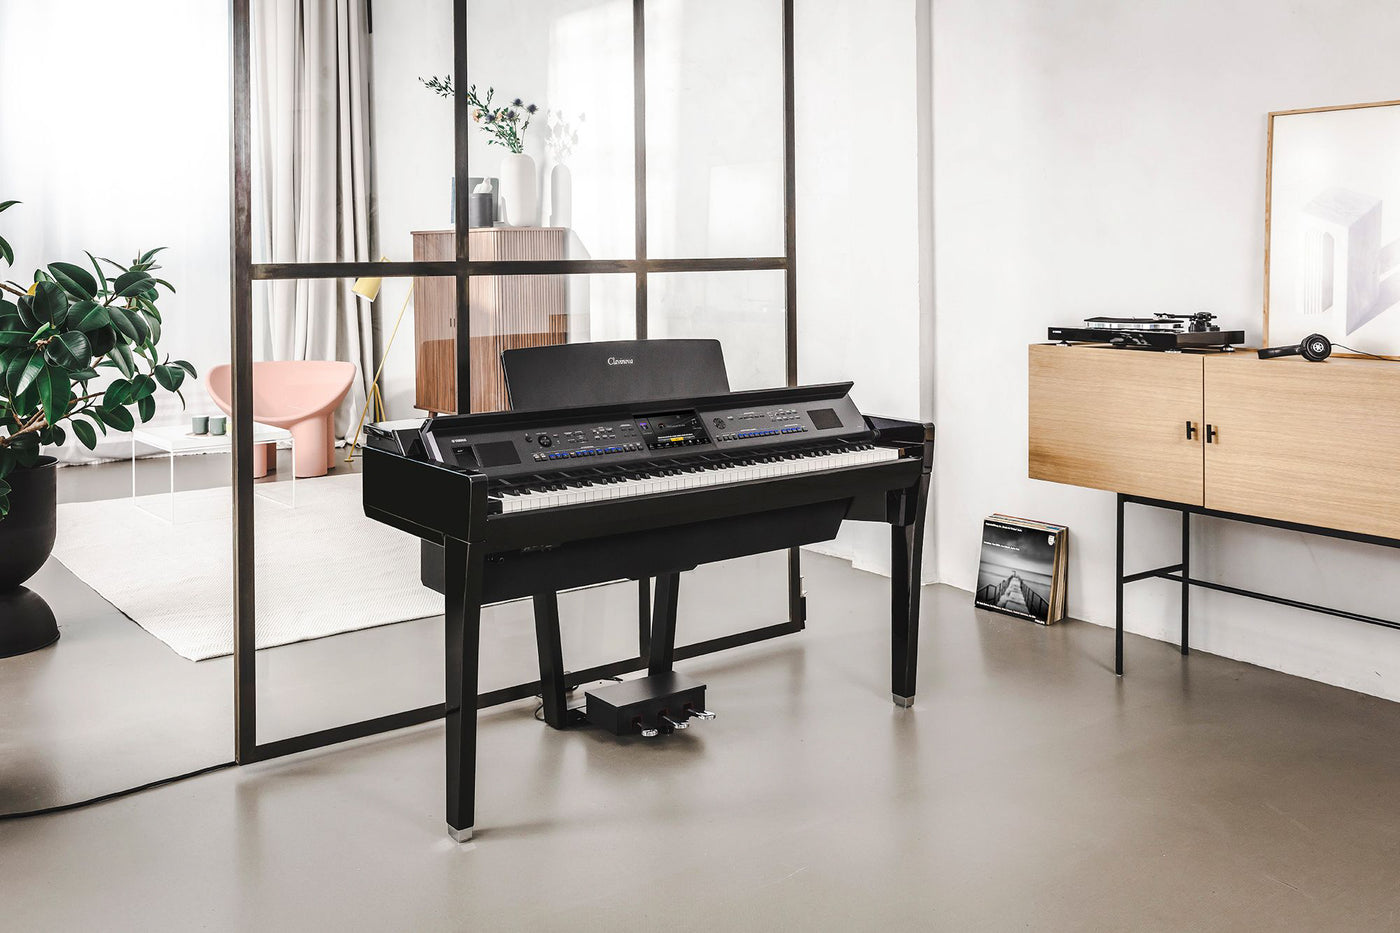 A modern digital piano with a sleek black design, sitting in a stylish living room with minimalist decor, next to a wooden sideboard with a vintage turntable on top.